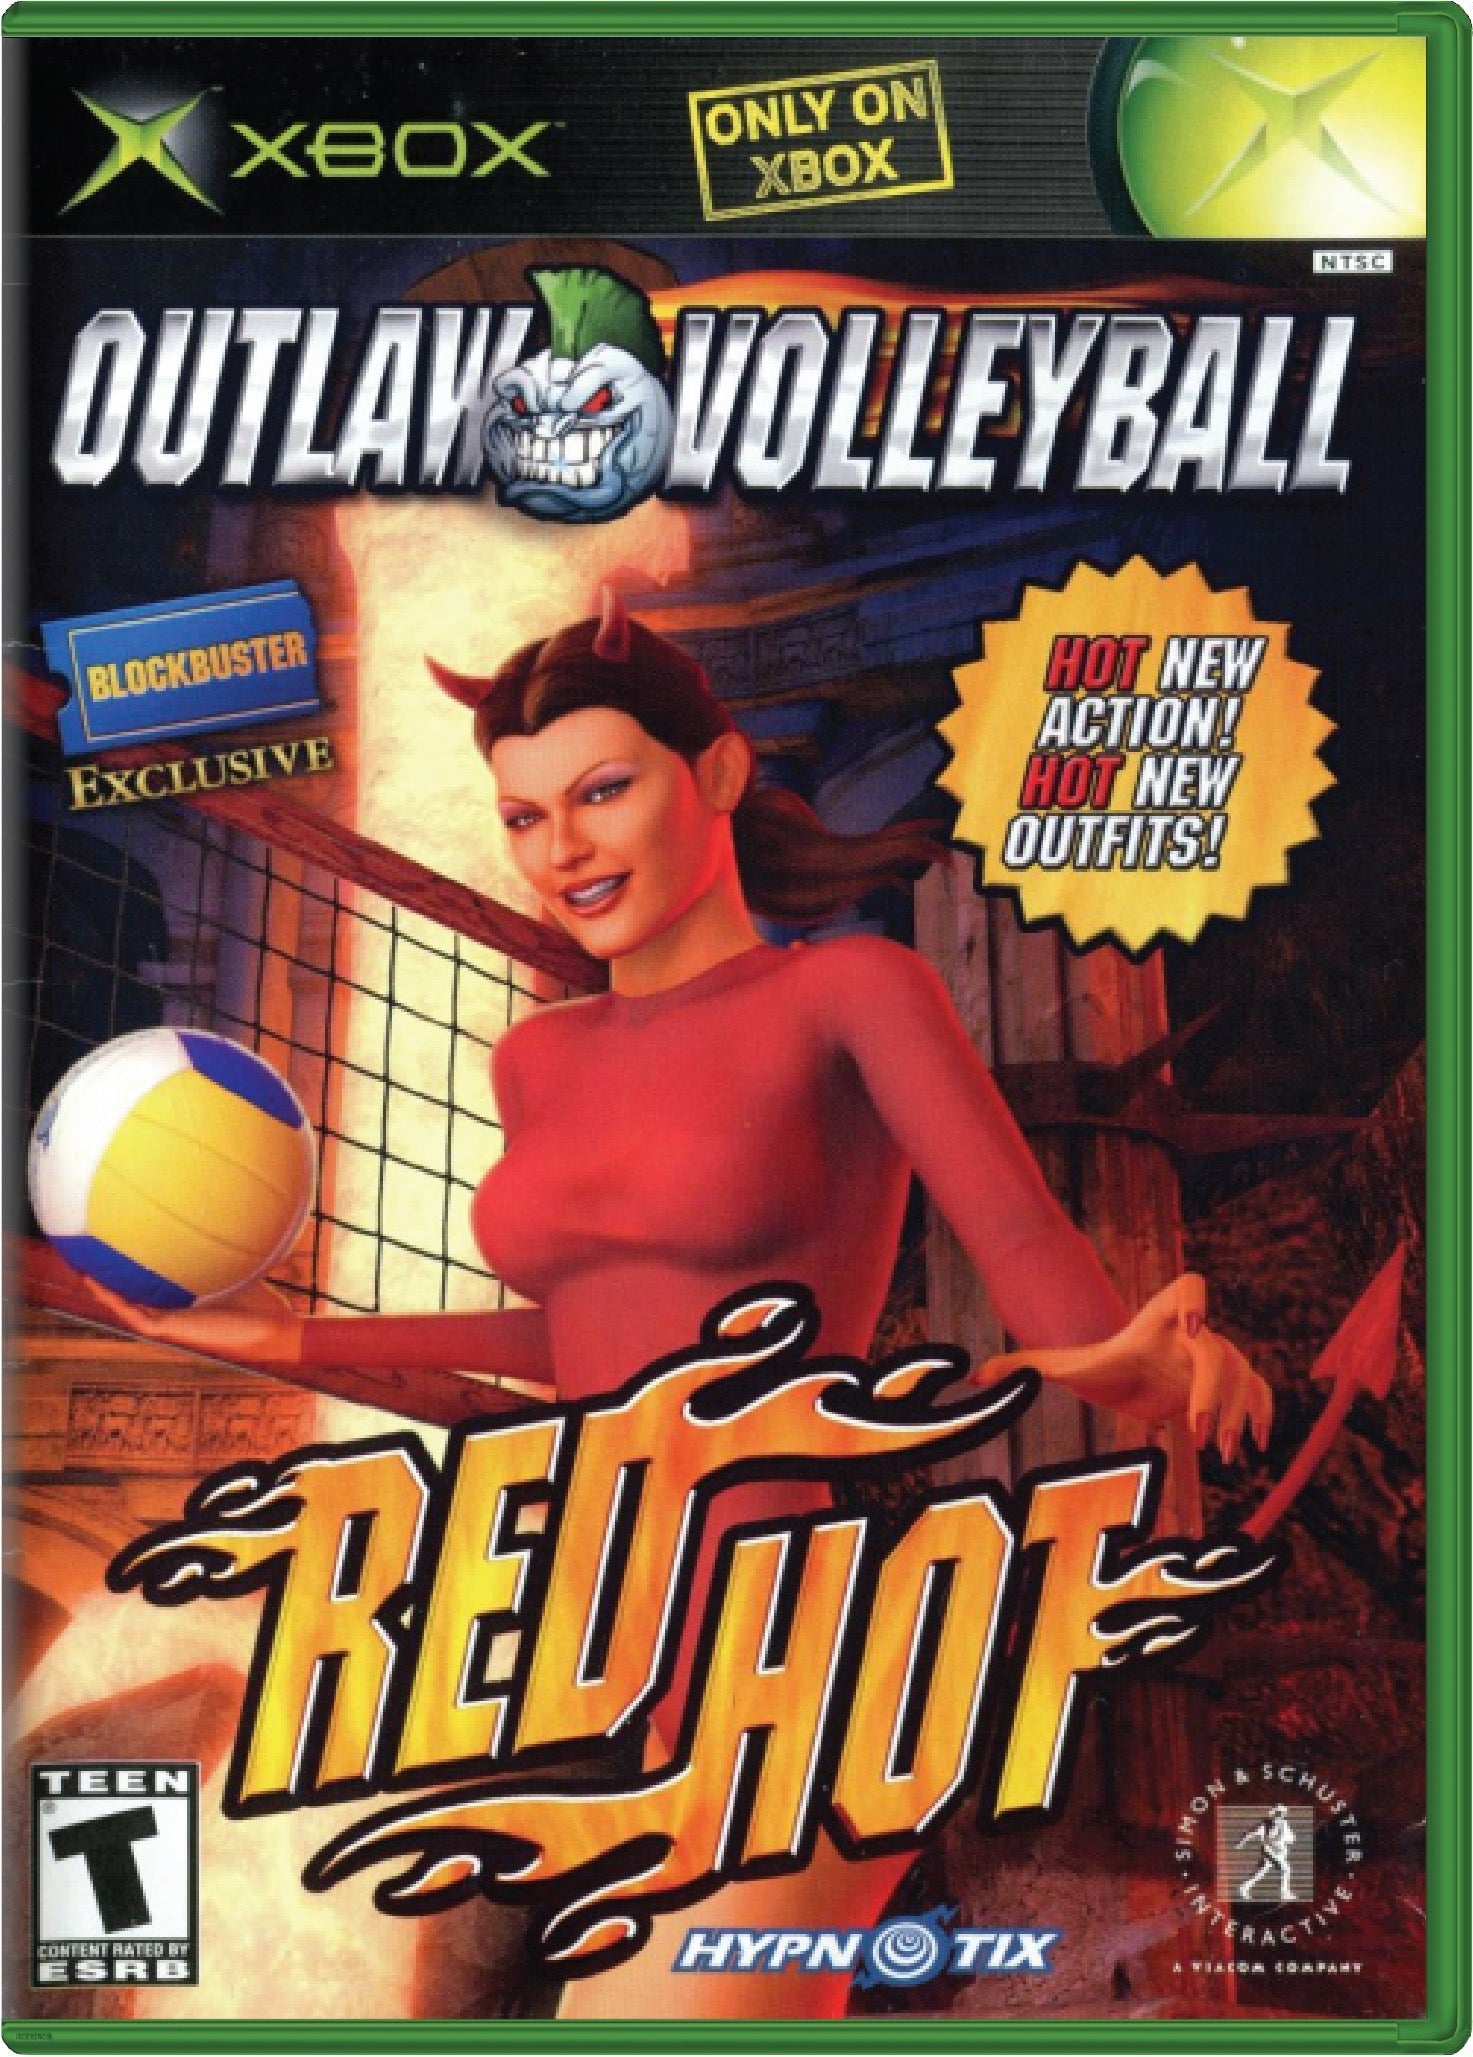 Outlaw Volleyball Red Hot Cover Art